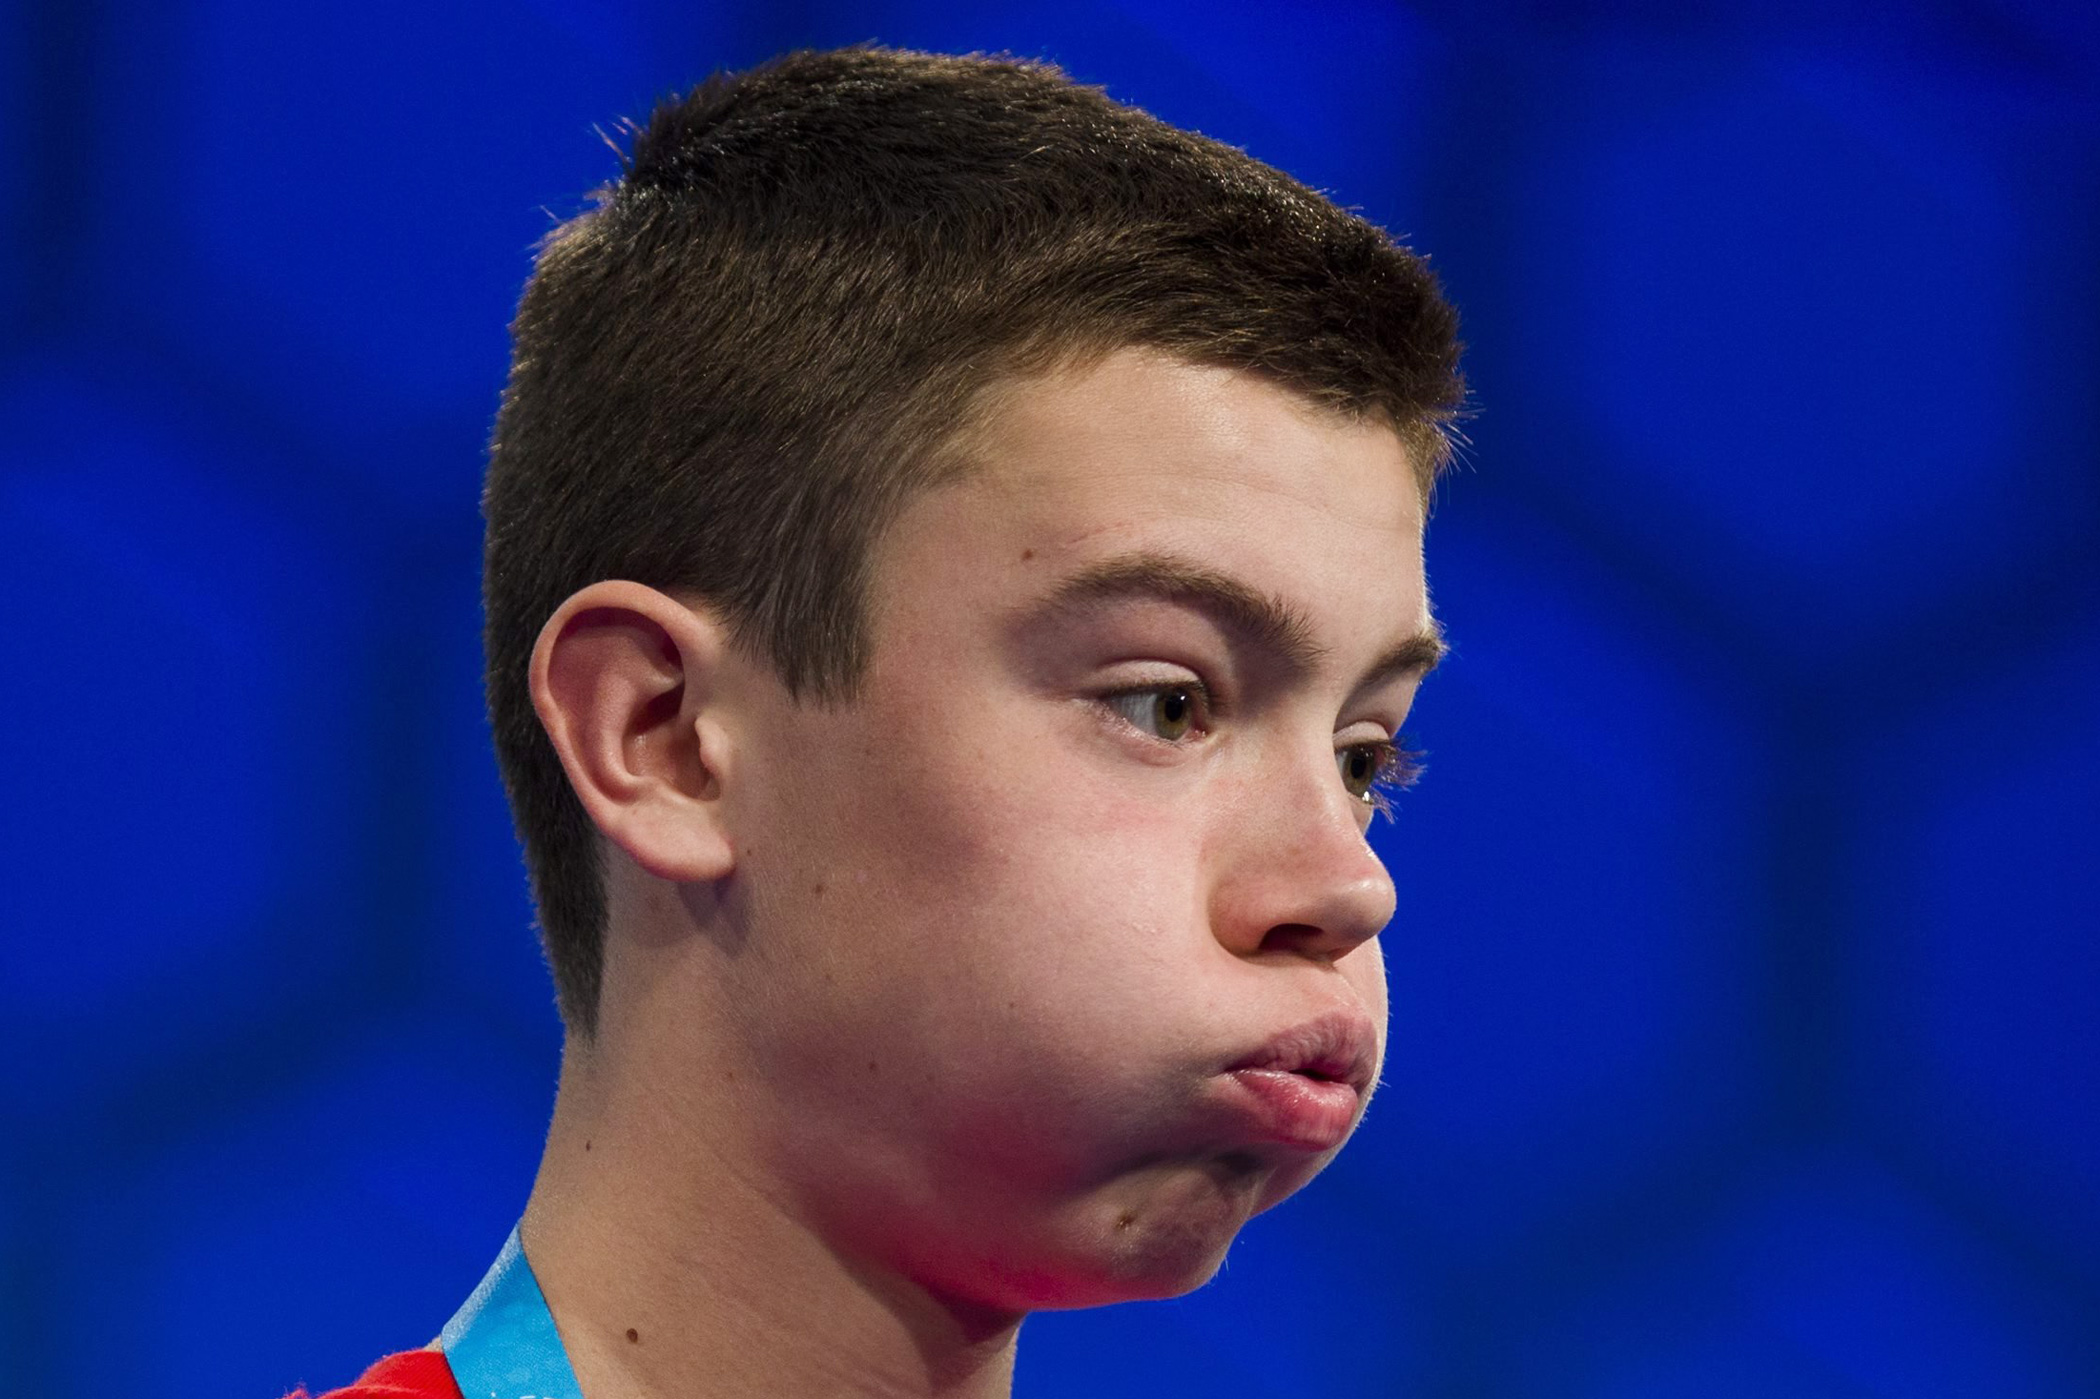 Zachary Hunsaker, of Idaho, prepares to spell 'trichinosis' during the preliminaries of the Scripps National Spelling Bee at National Harbor, Md., May 25, 2016.